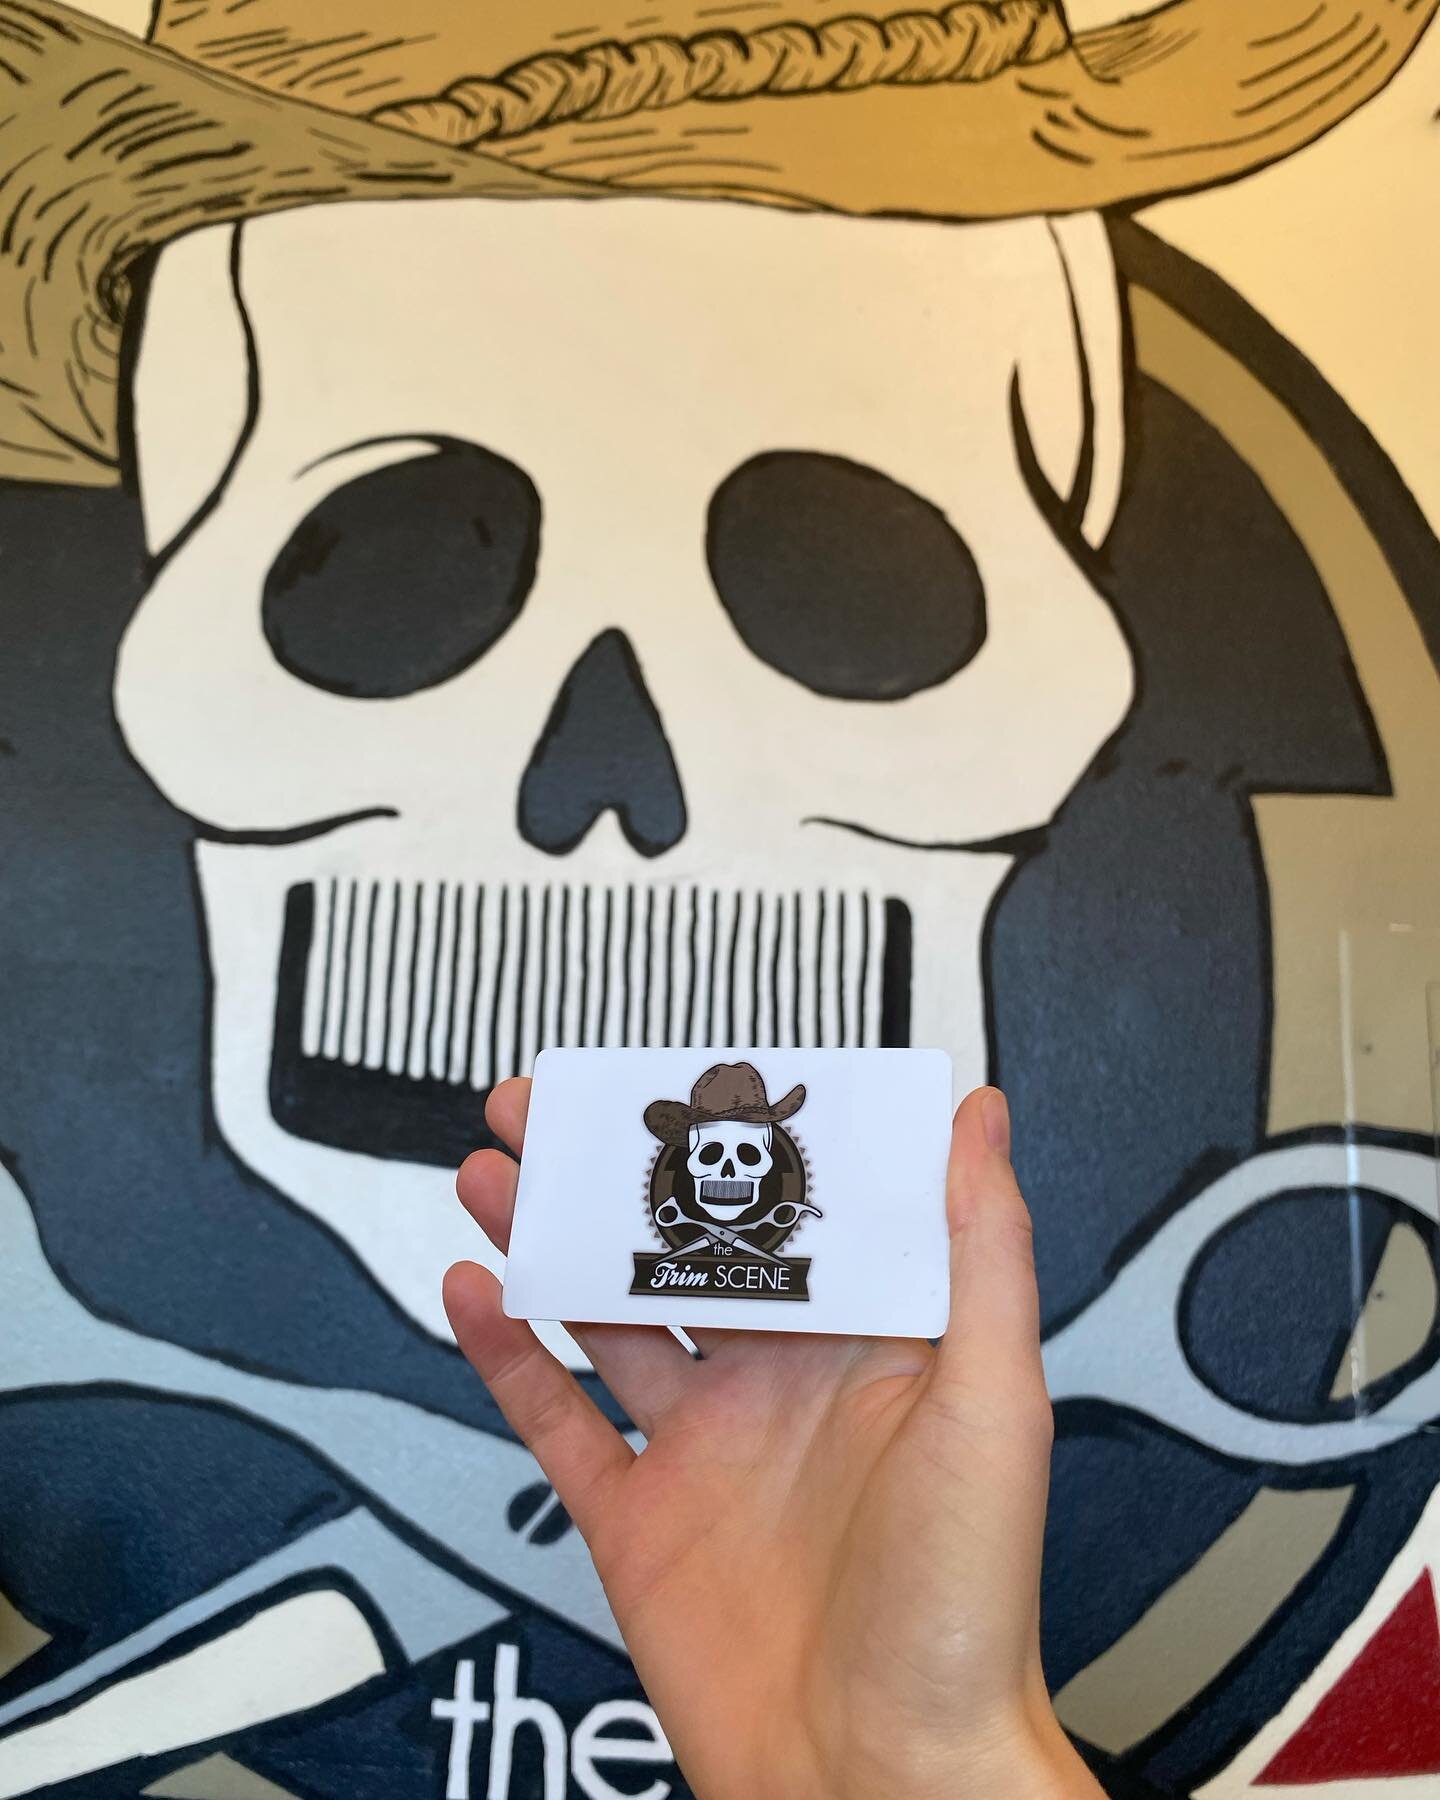 It&rsquo;s November 1st!!
Take care of that holiday shopping fast and easy with what&rsquo;s  sure to be a crowd pleaser
Gift Cards are in! Pick up one today 💈✂️
.
.
.
.
.
#arcata #humboldt #getahaircuthippie #holiday